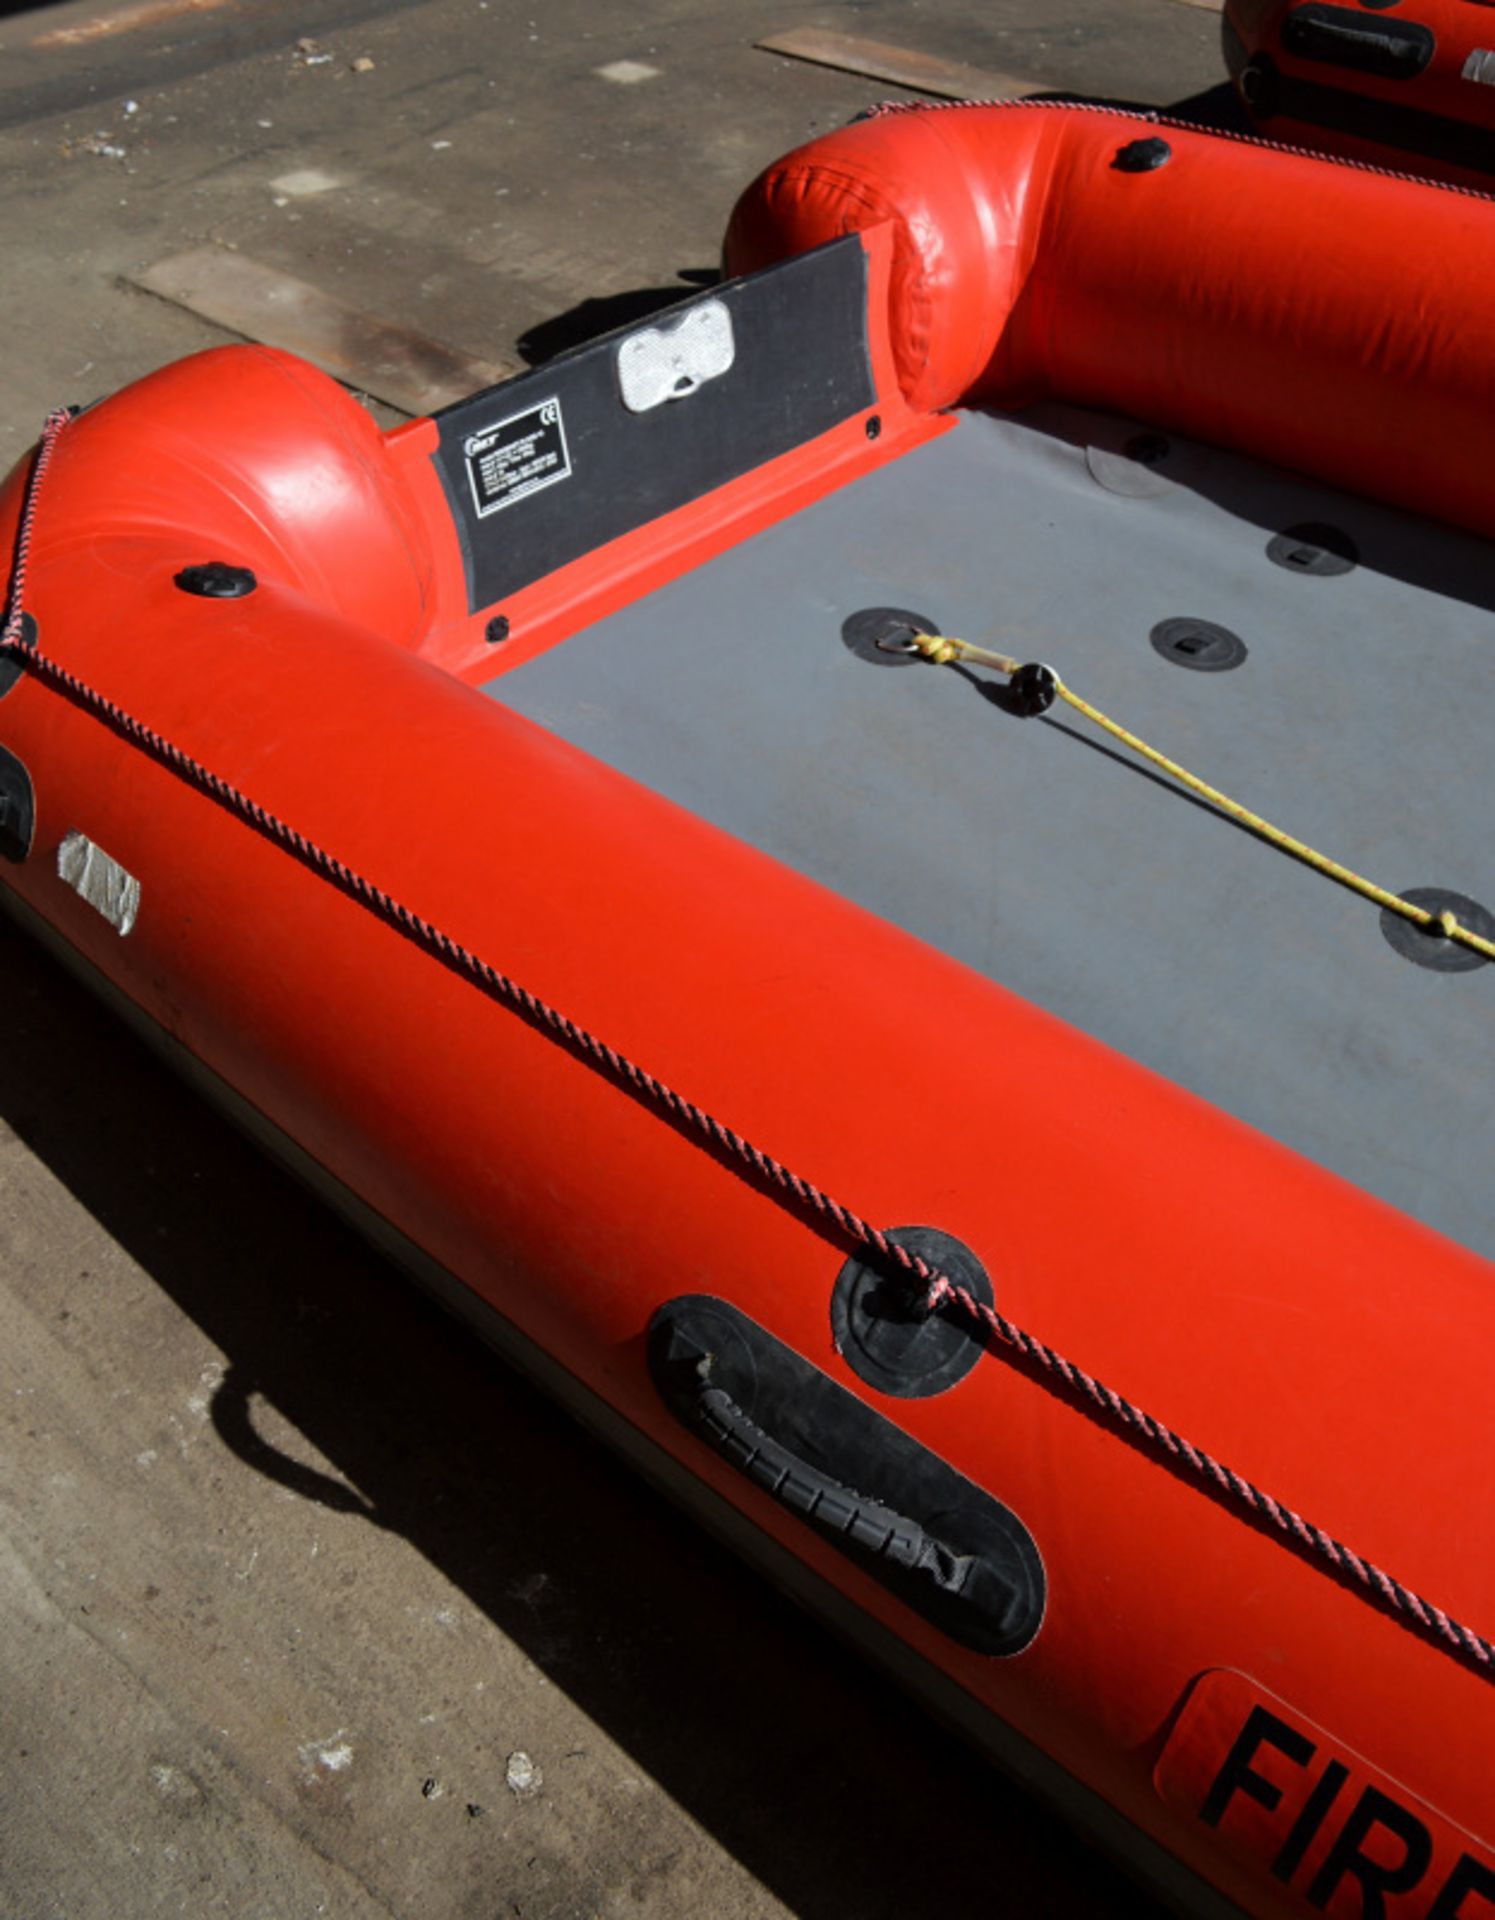 SIT Safequip ReqQraft Flood 15 inflatable boat - Image 5 of 11